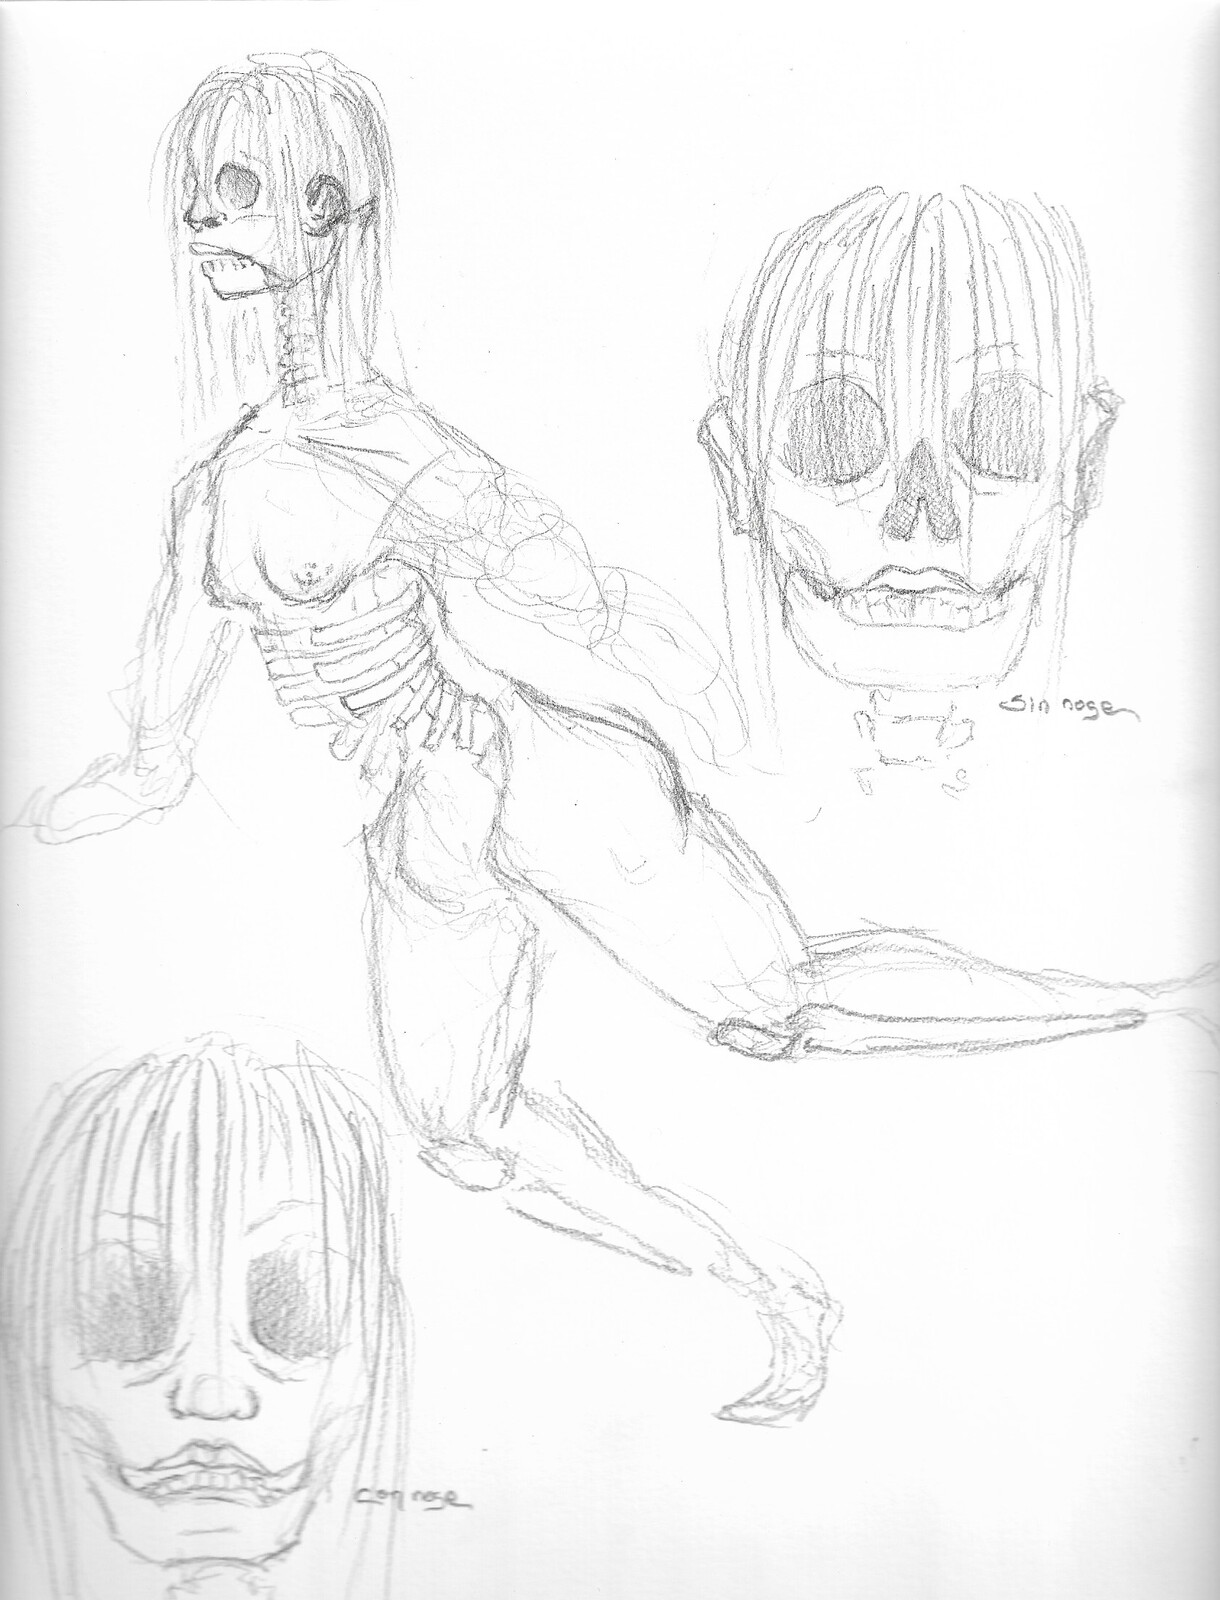 Early designs for Nothing explored the idea of a reanimated corpse. Portions of her would no longer exist, but feminine features like her breasts, legs, and hair would remain. 